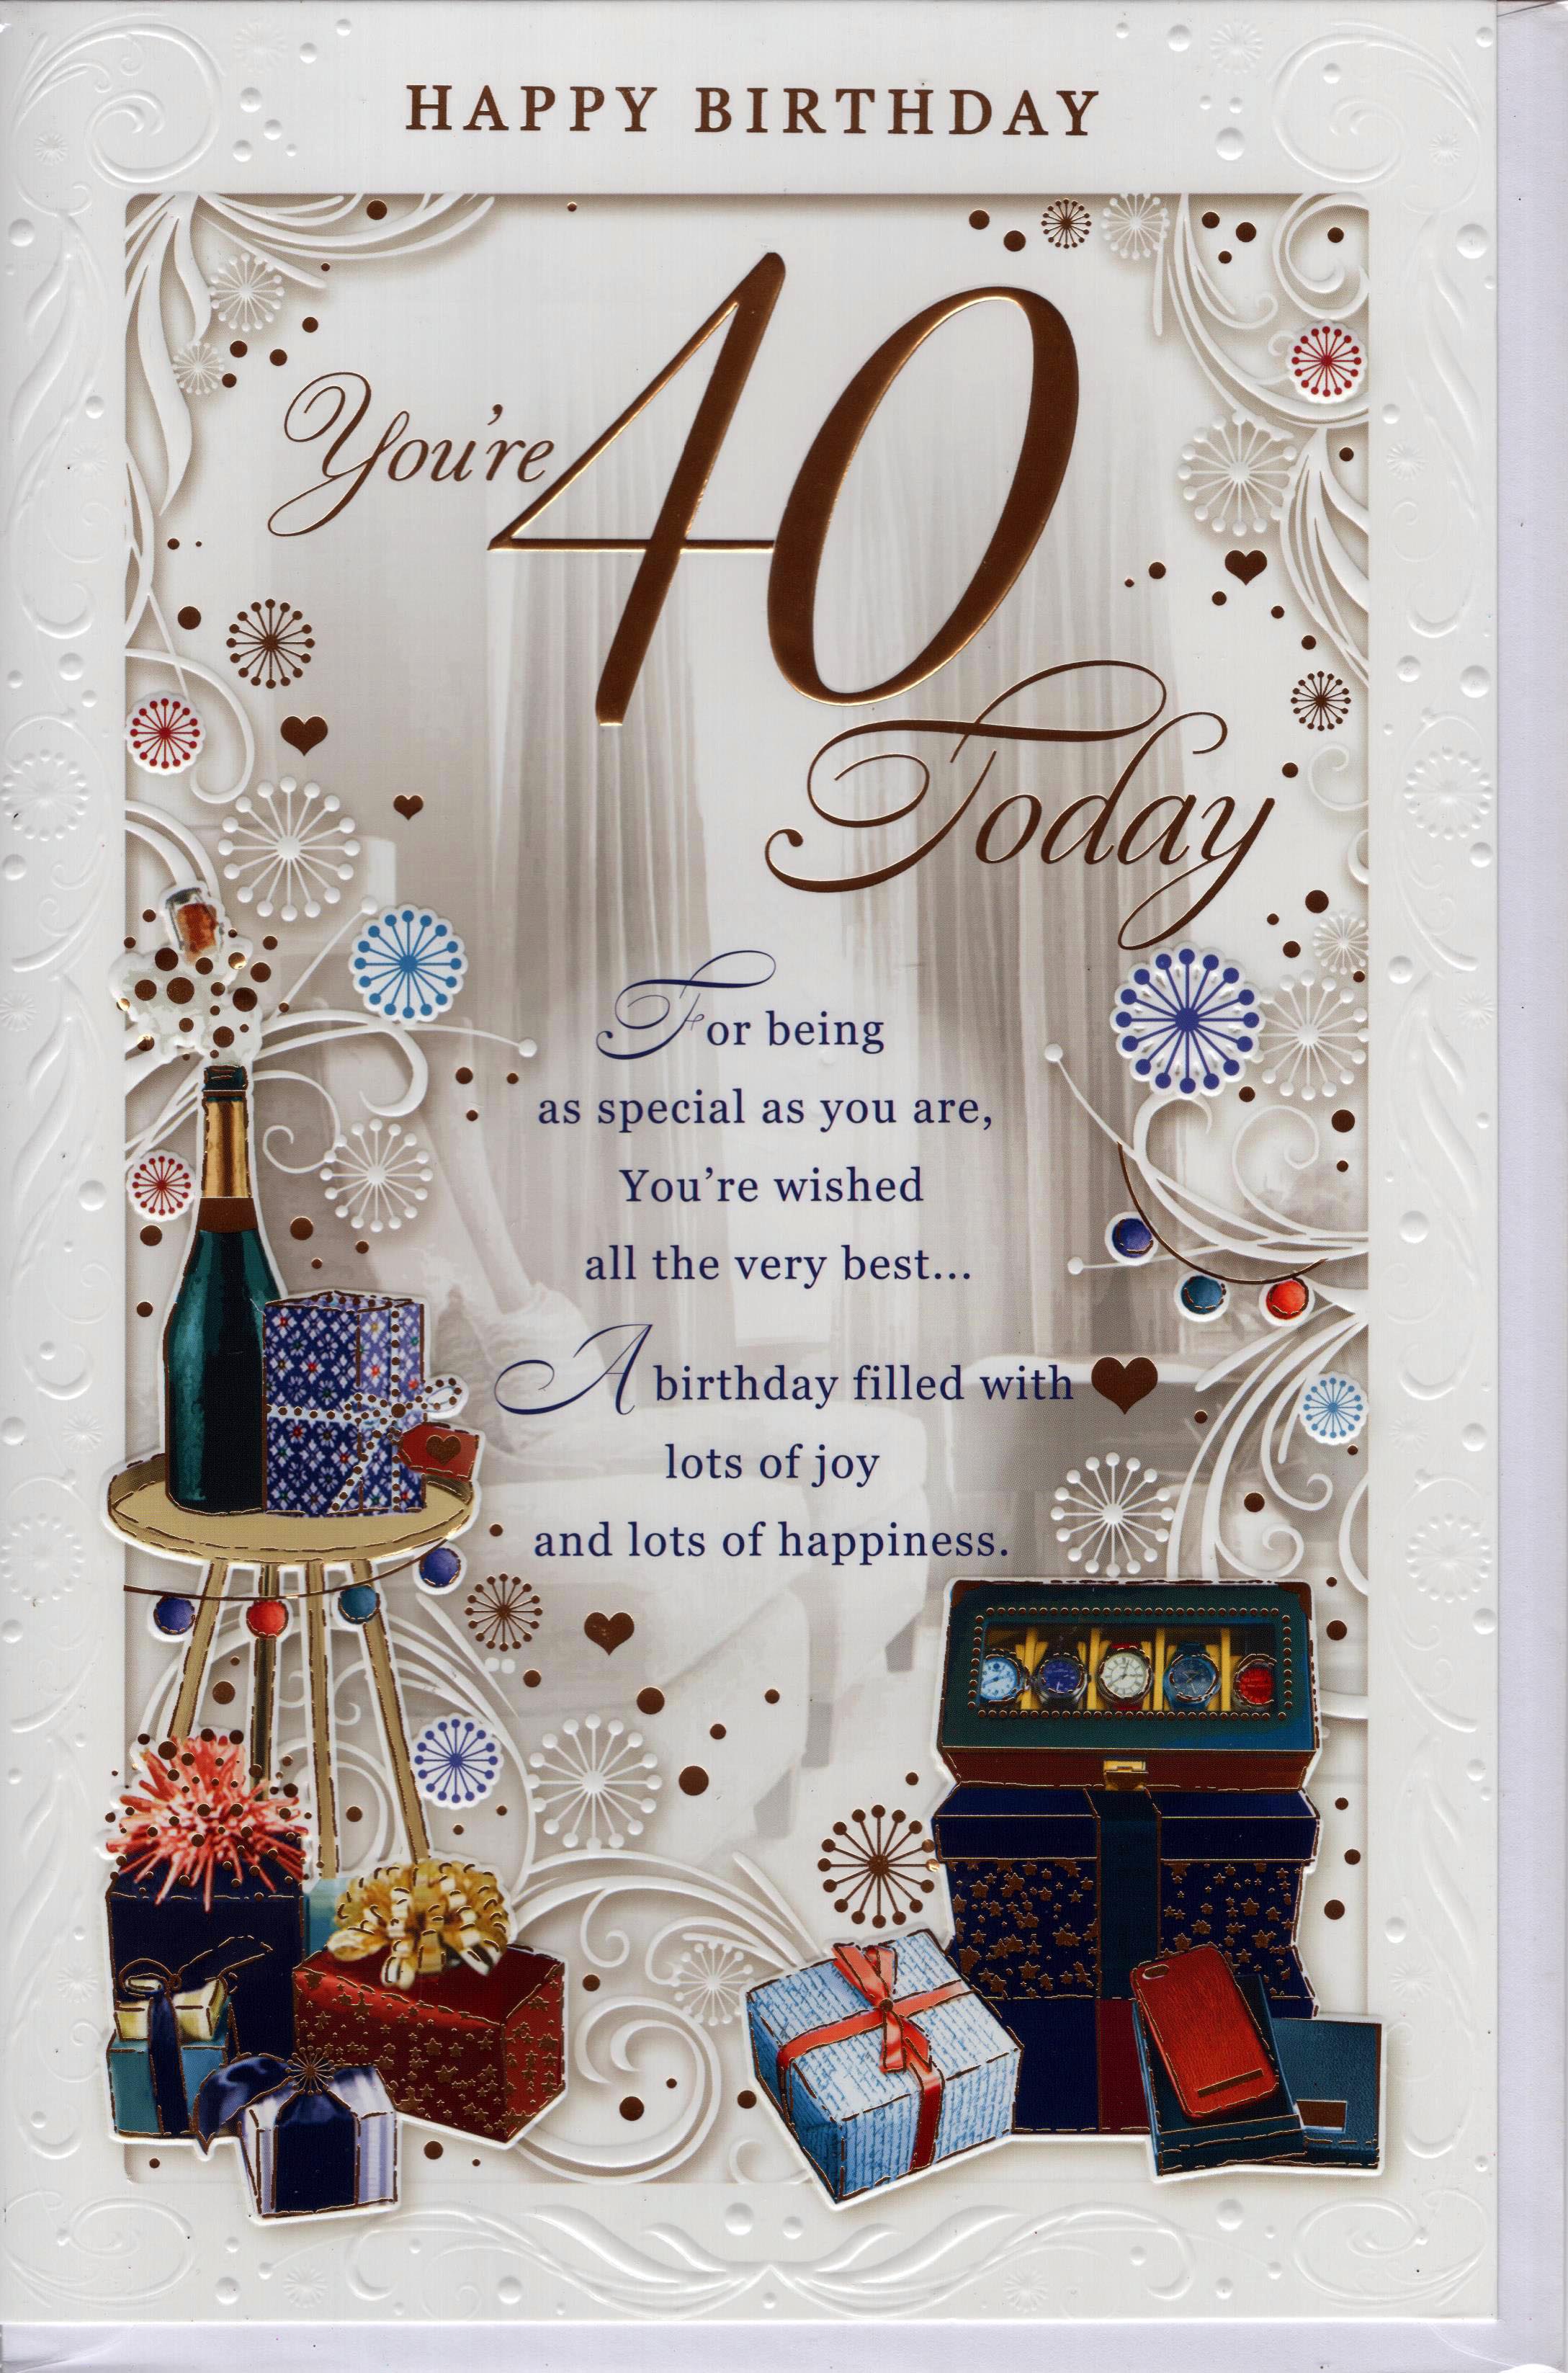 You're 40 Today Birthday Greeting Card